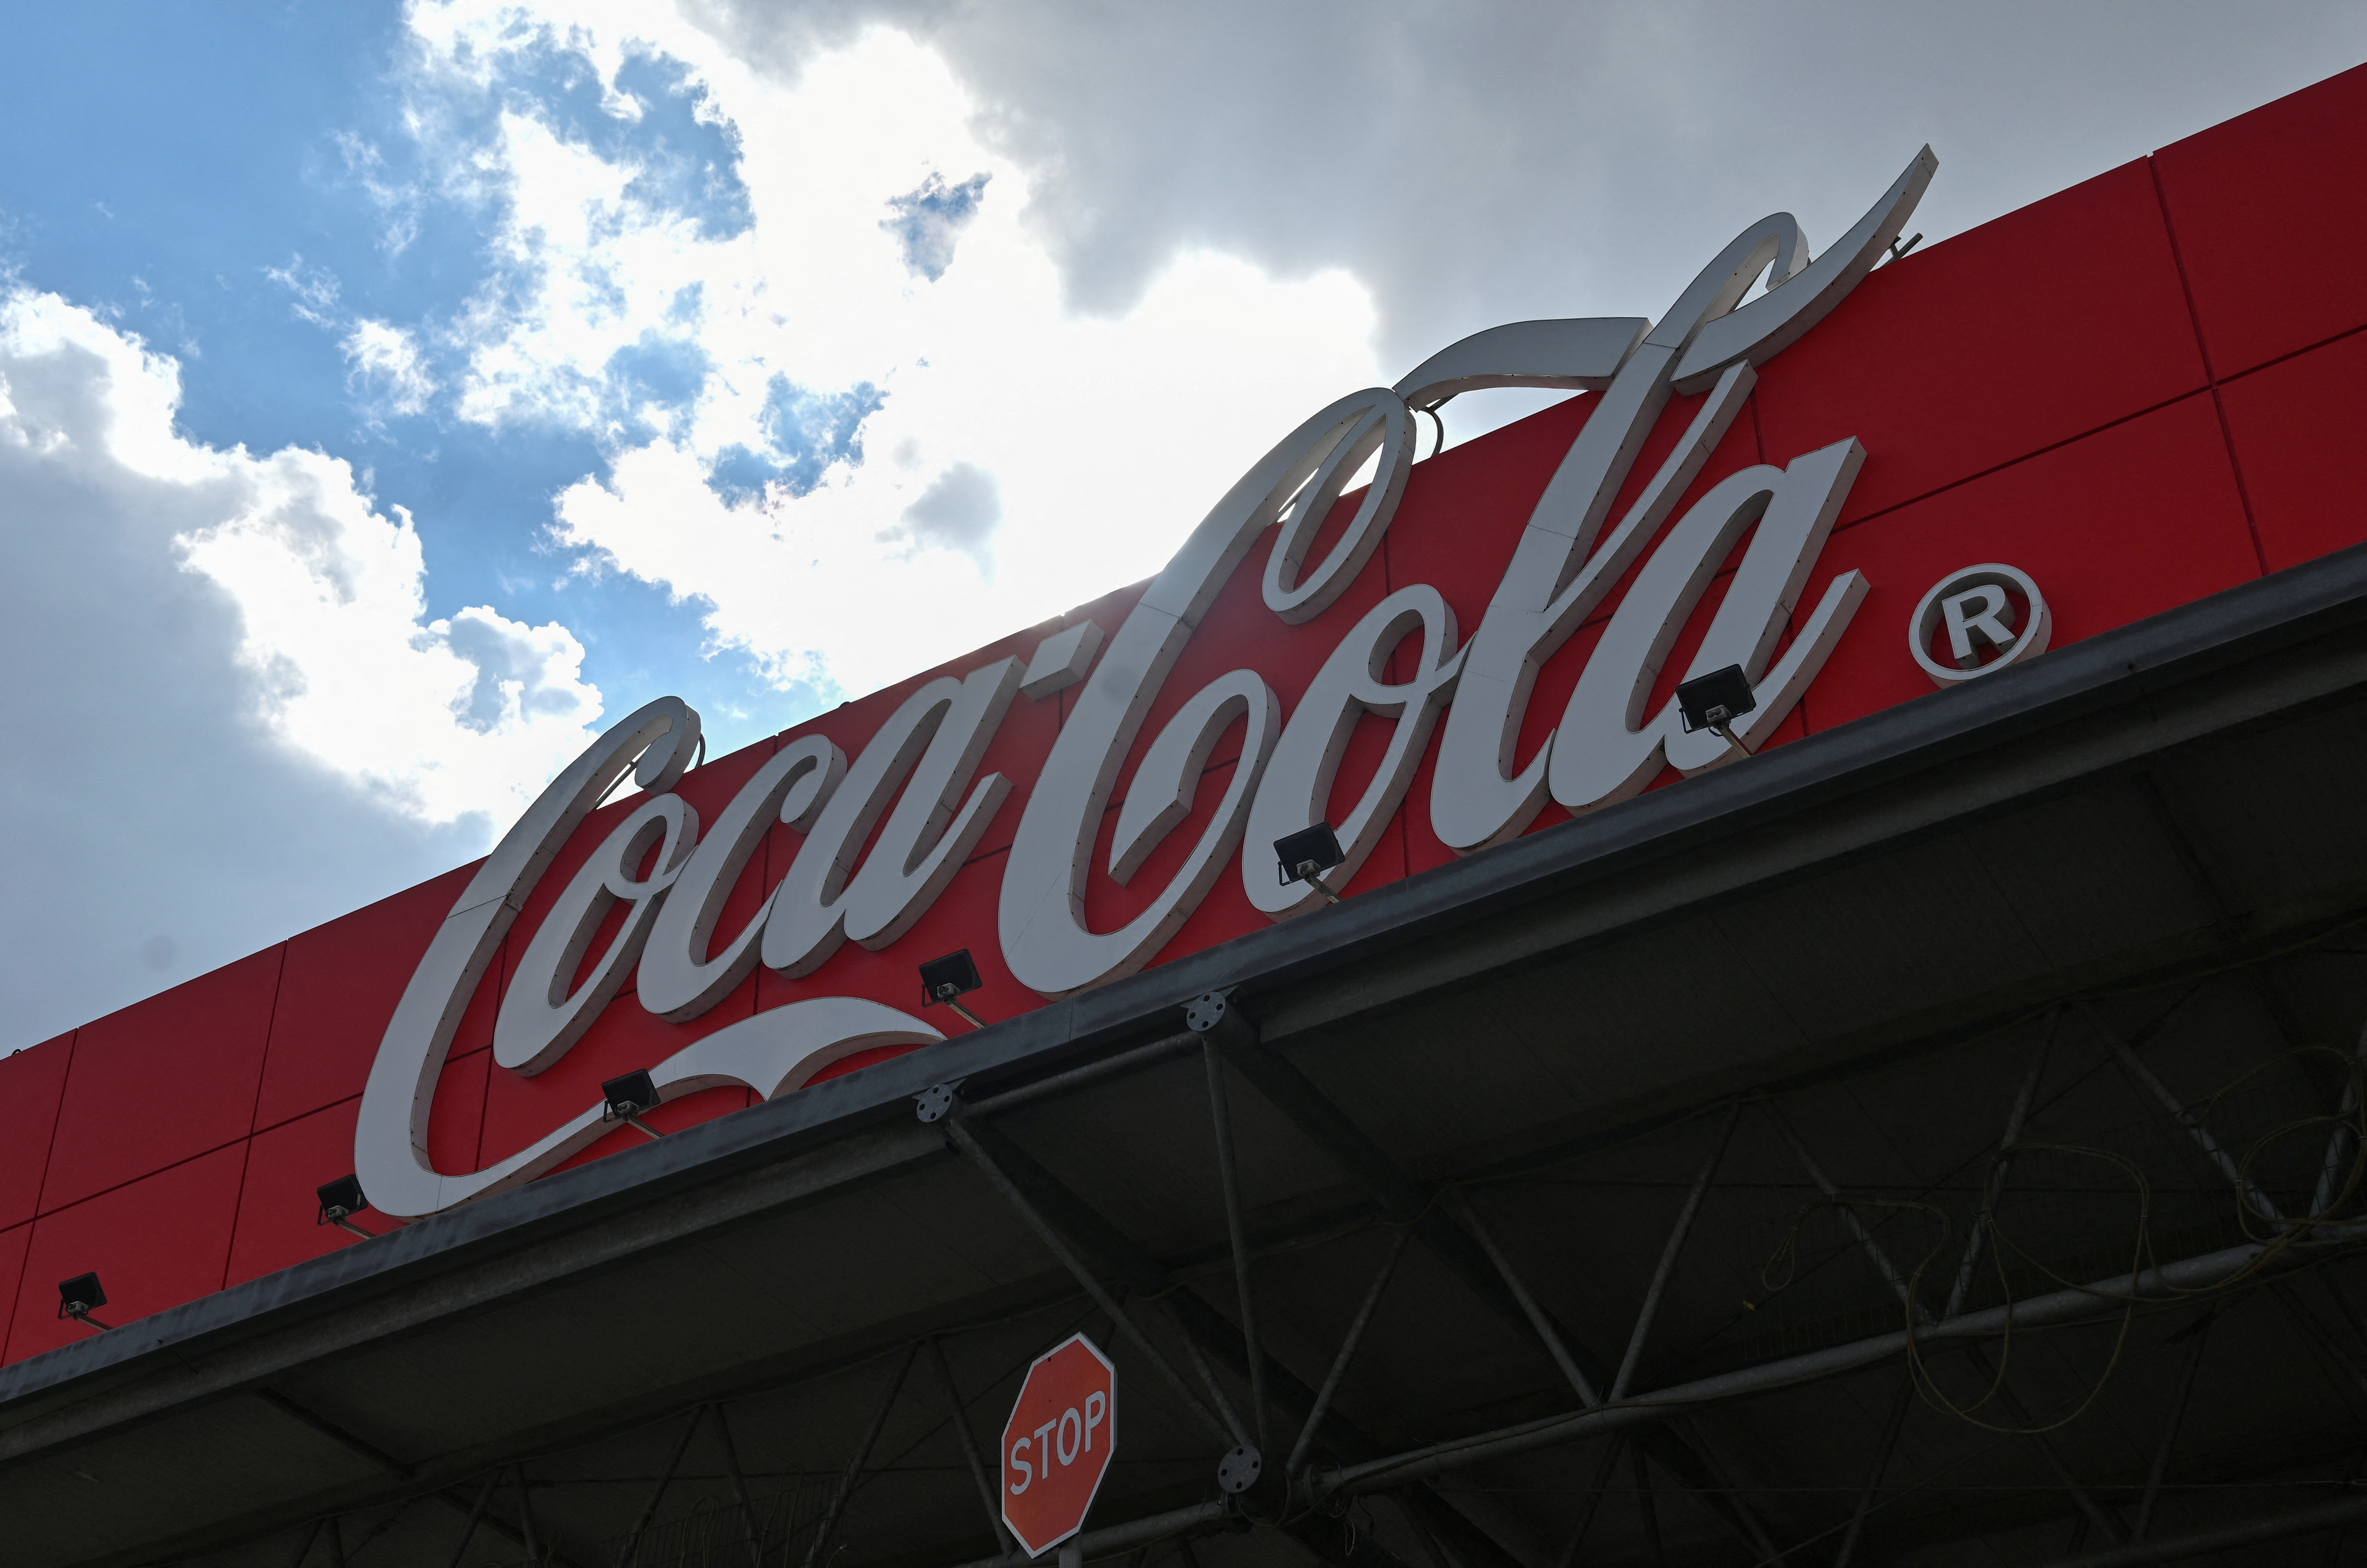 Coca-Cola turns to refillable glass bottles in fight against inflation